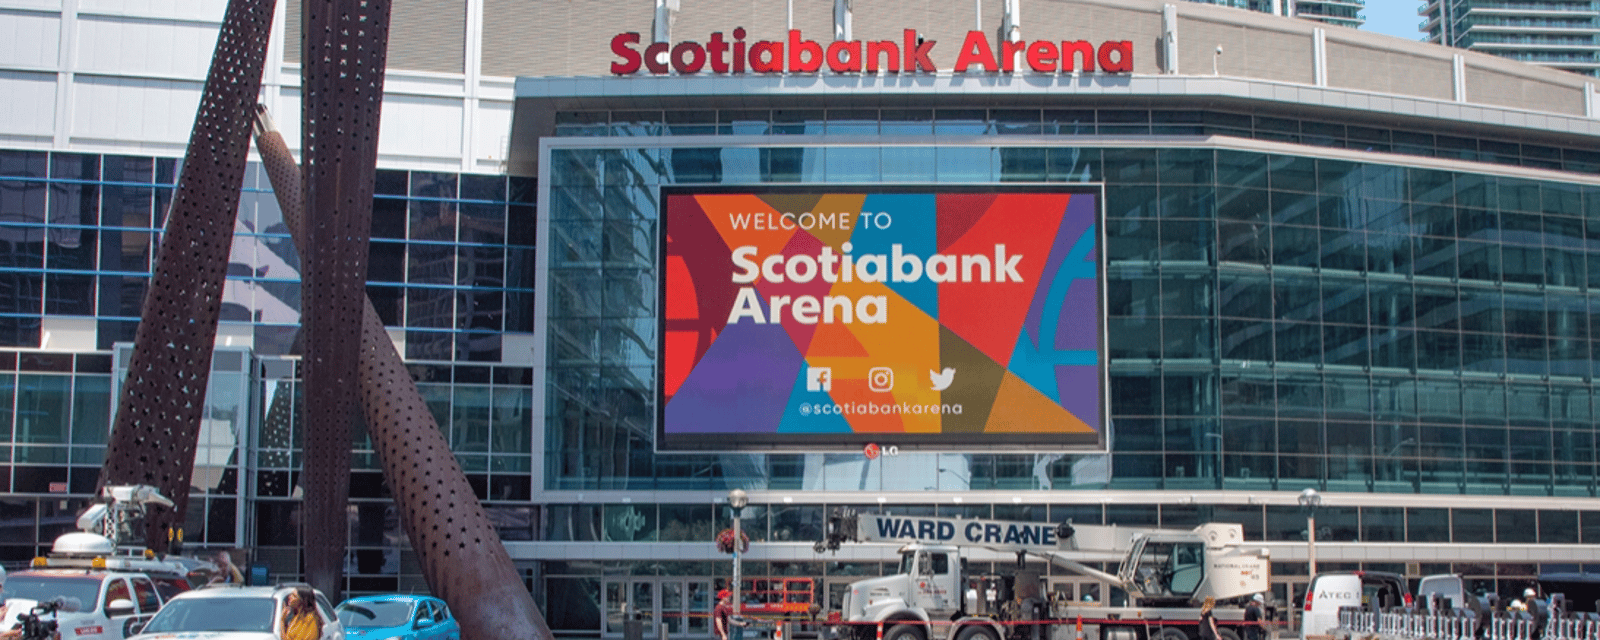 Major changes coming to Scotiabank Arena in Toronto 